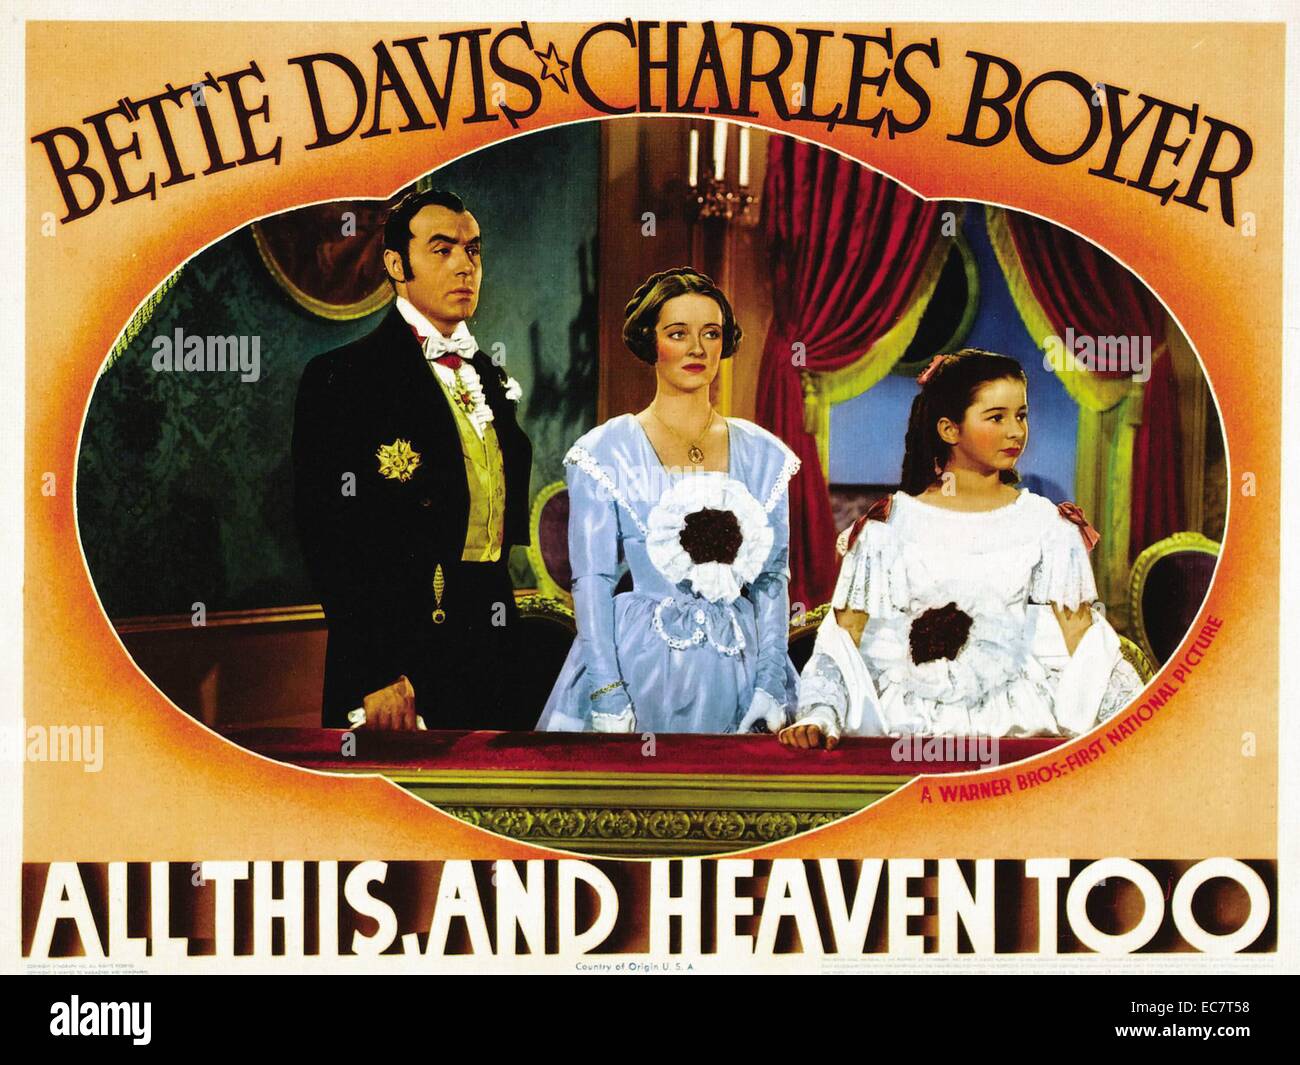 All This, and Heaven Too is a 1940 American drama film produced and directed by Anatole Litvak. The film stars Bette Davis and Charles Boyer and was based on a novel by Rachel Field. Her novel was in turn based on the true story of Field's great-aunt, Henriette Deluzy Desportes, a French governess who fell in love with the Duc de Praslin, her employer. When Praslin's wife, the Duchesse, was murdered, Henriette was implicated. Stock Photo